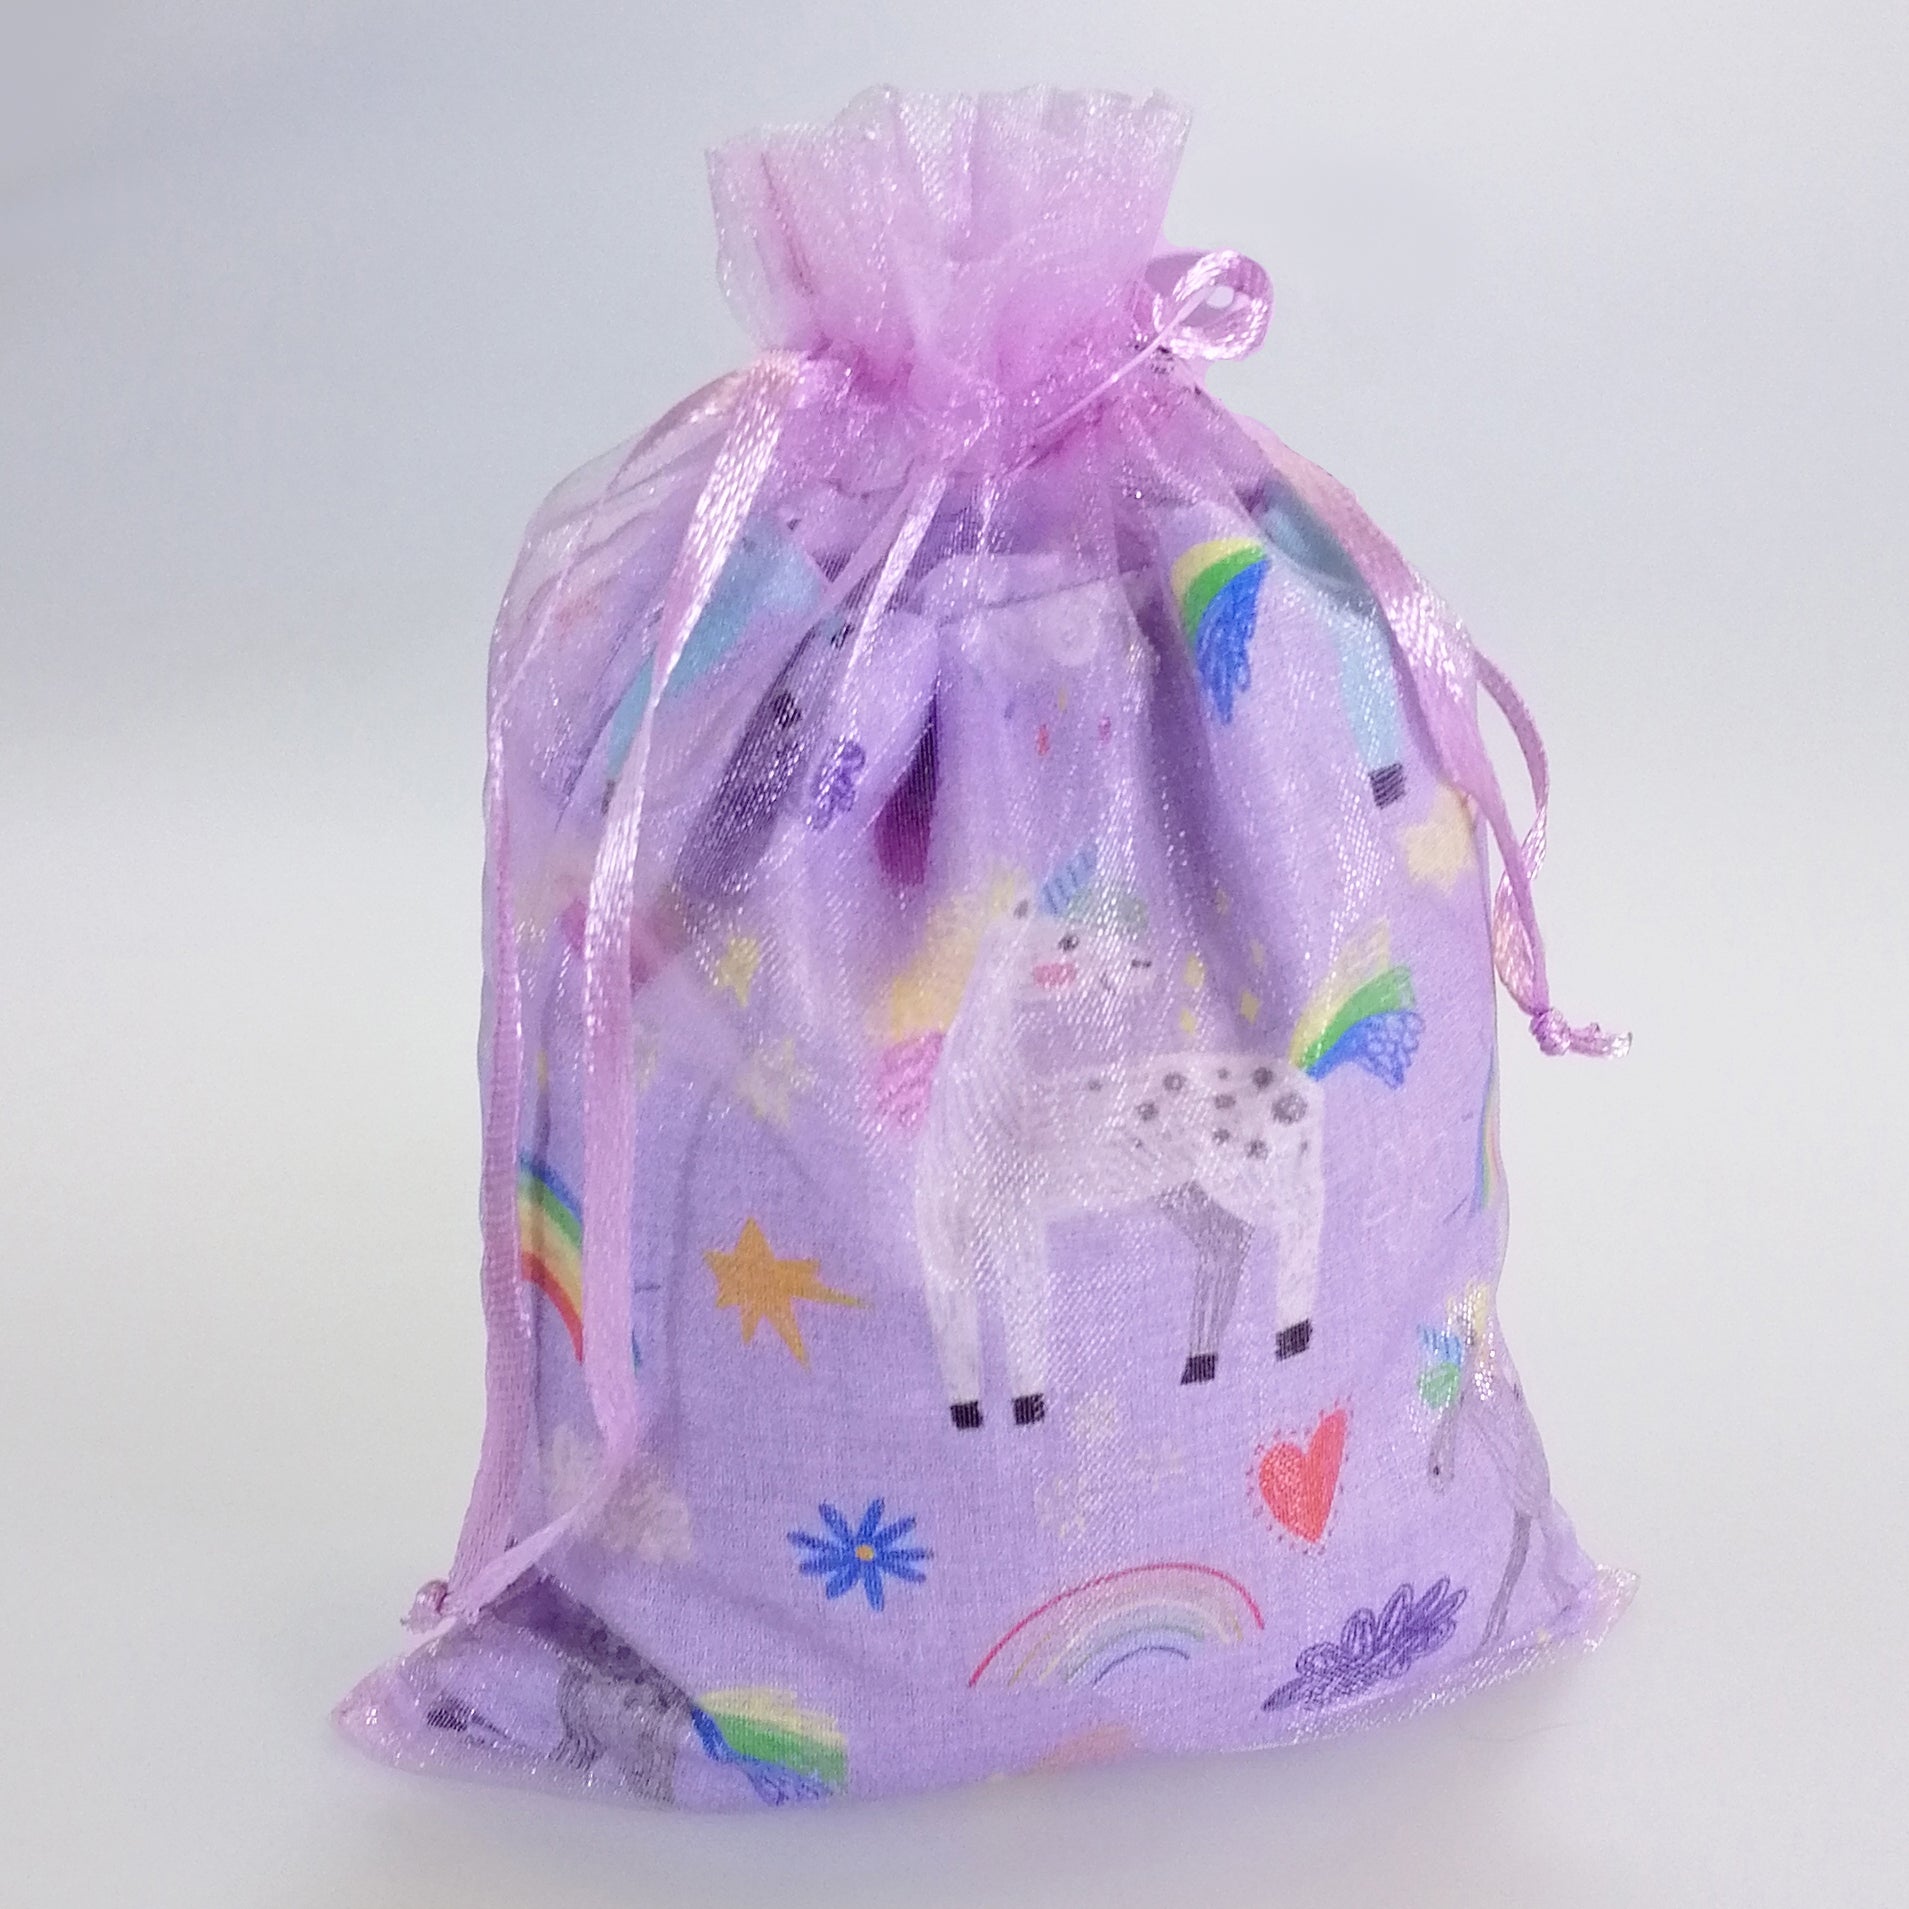 Kids 'Ouchie' Pack - Cold Compress Wheat Bag - Unicorns